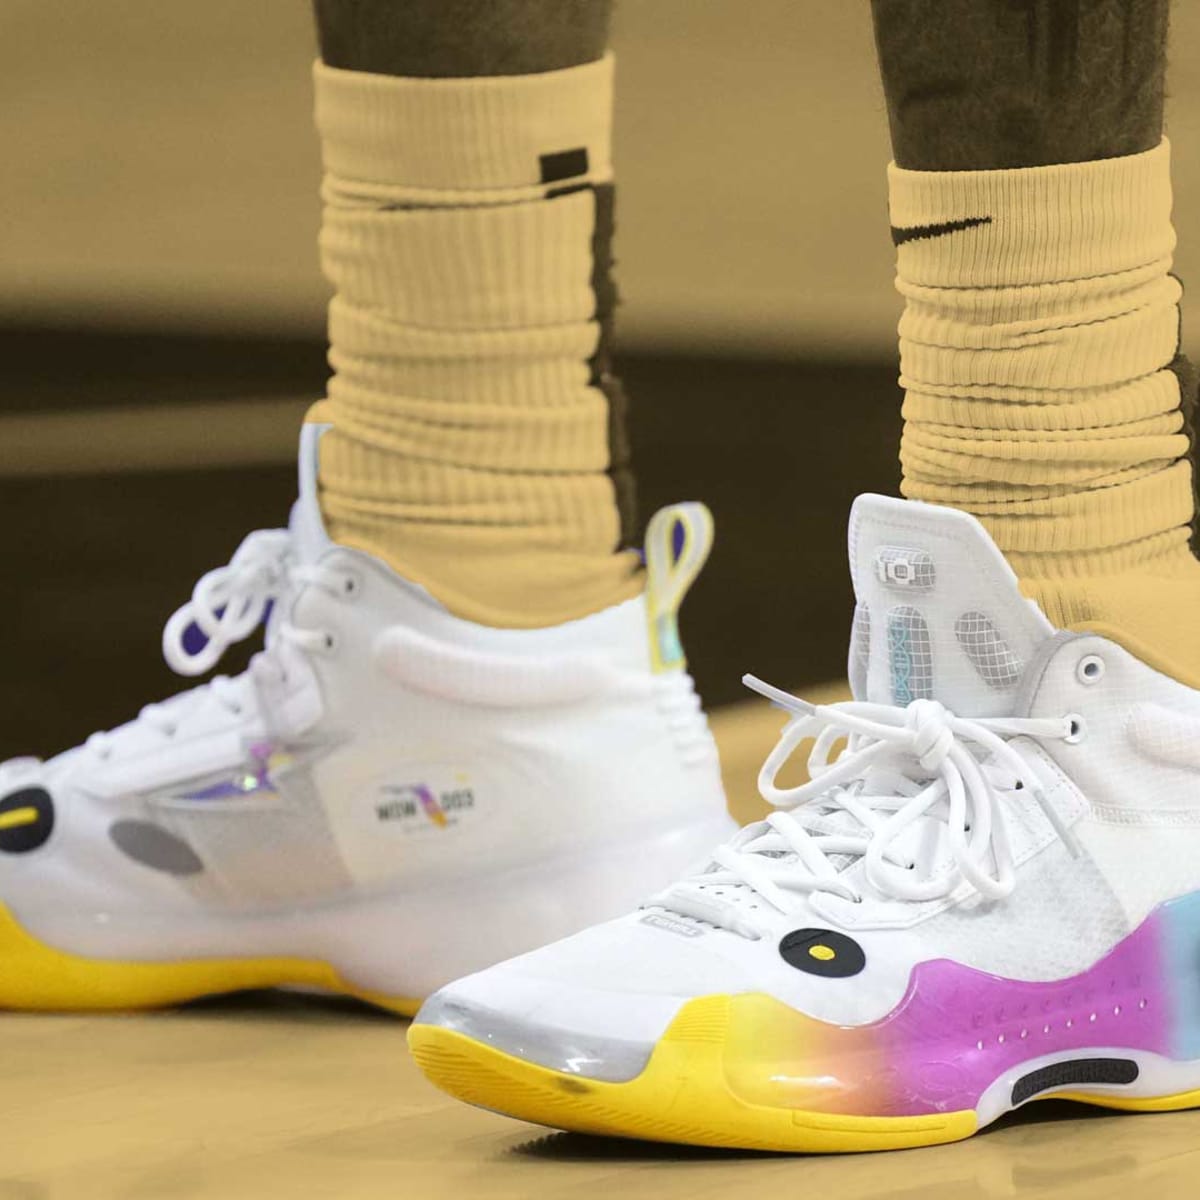 Li Ning Wade DLO ICE Low D'Angelo Russell Basketball Shoes 